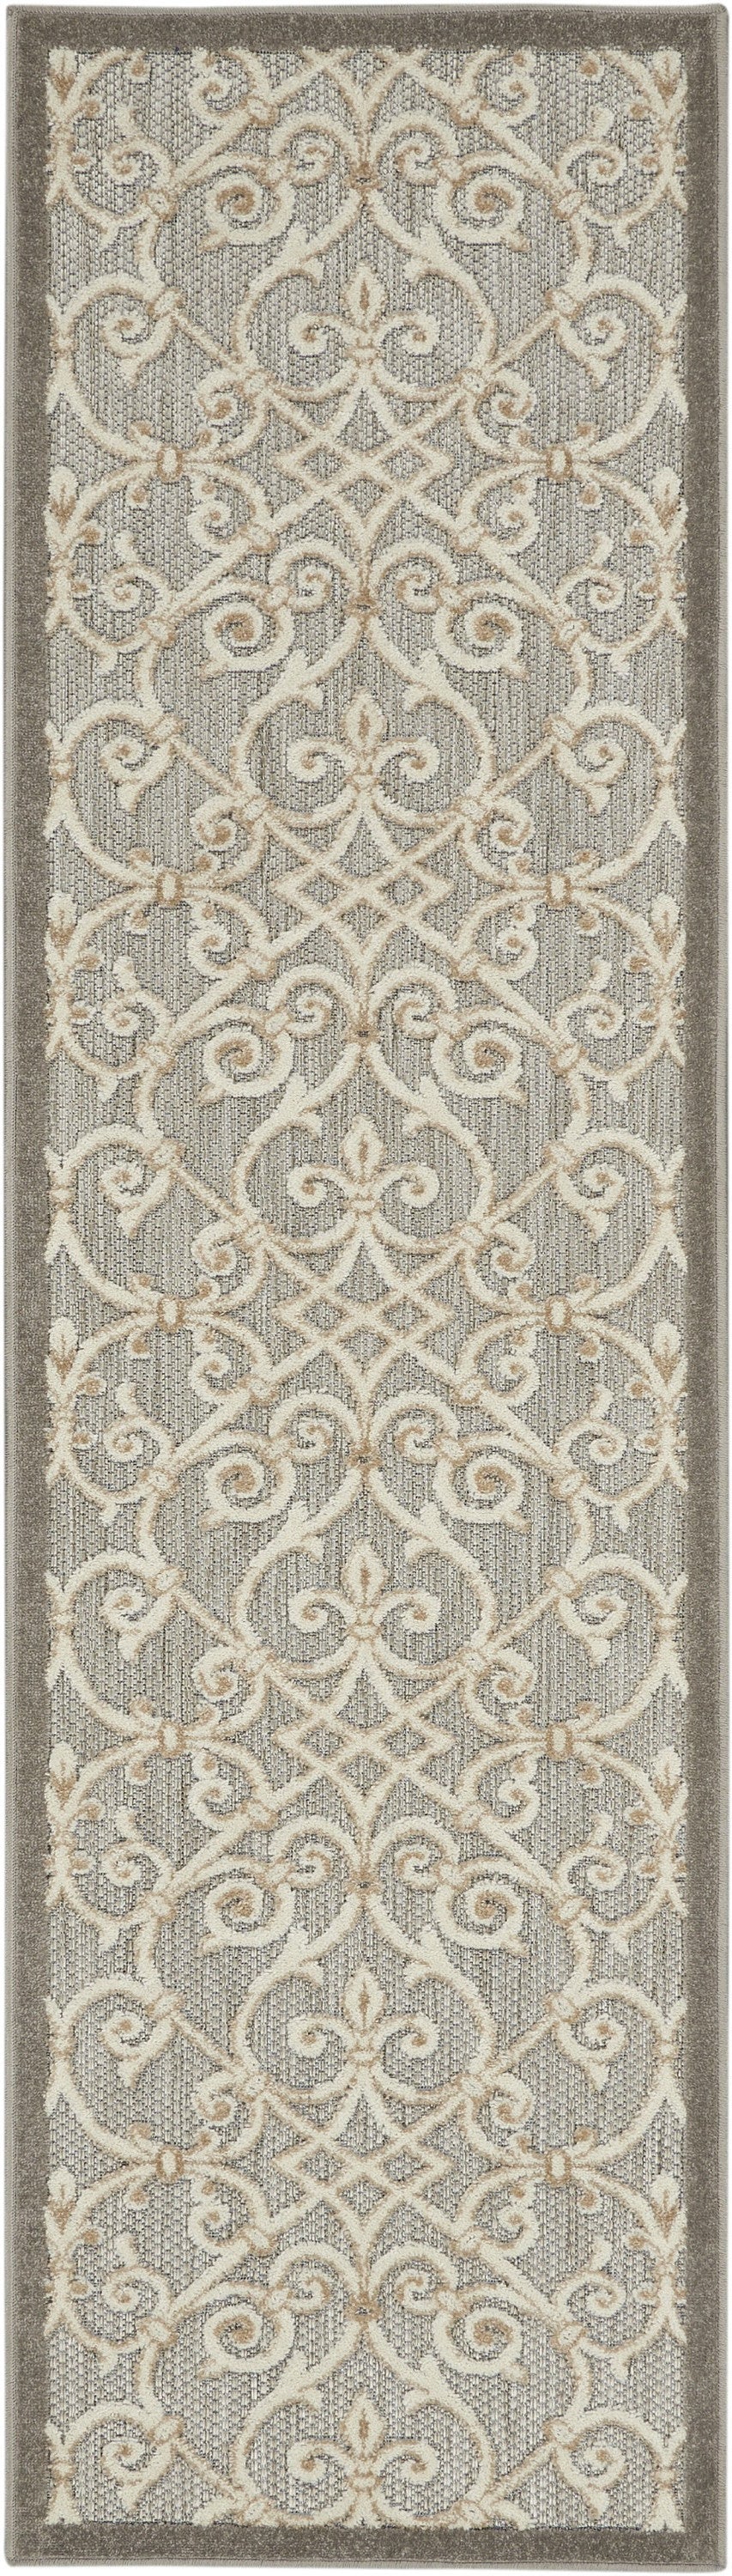 2' X 8' Gray And Ivory Floral Indoor Outdoor Area Rug